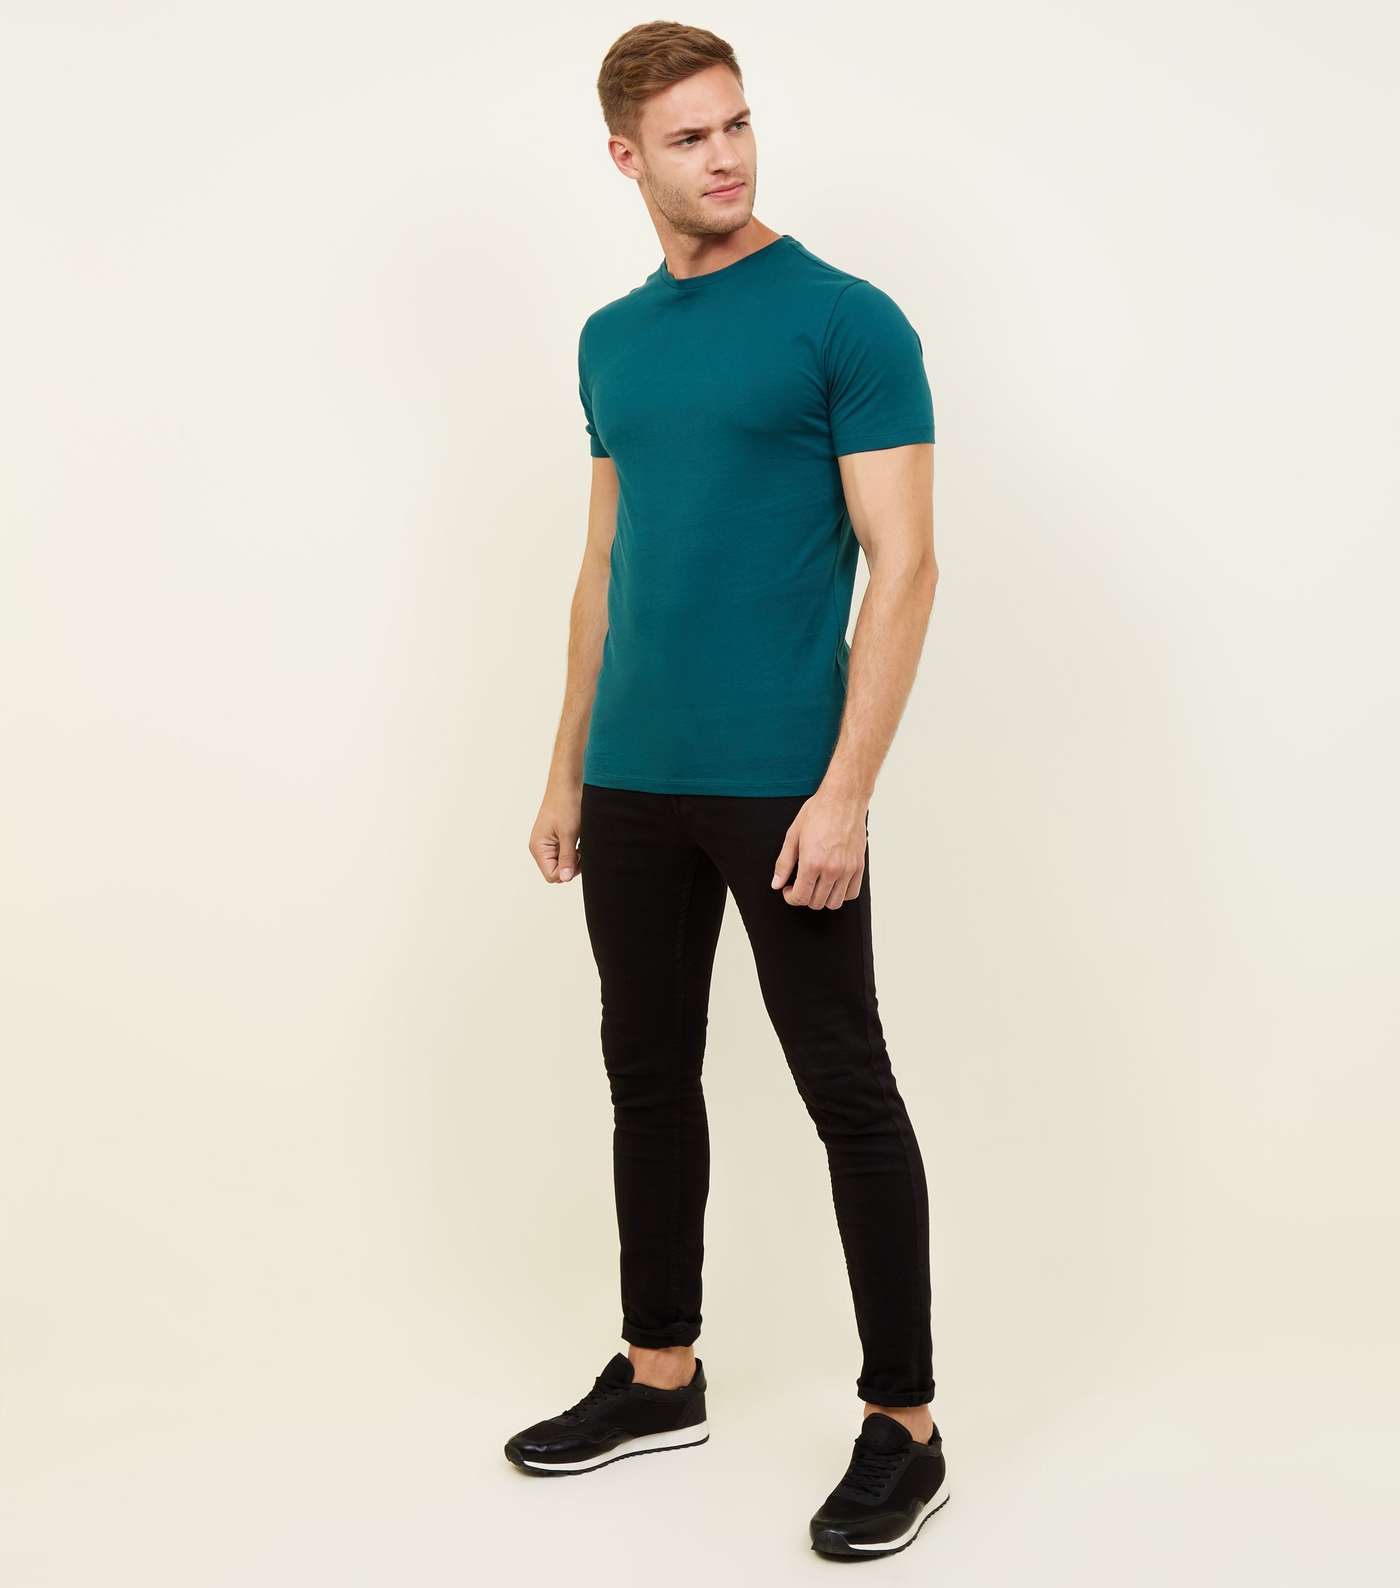 Teal Short Sleeve Muscle Fit T-Shirt Image 2